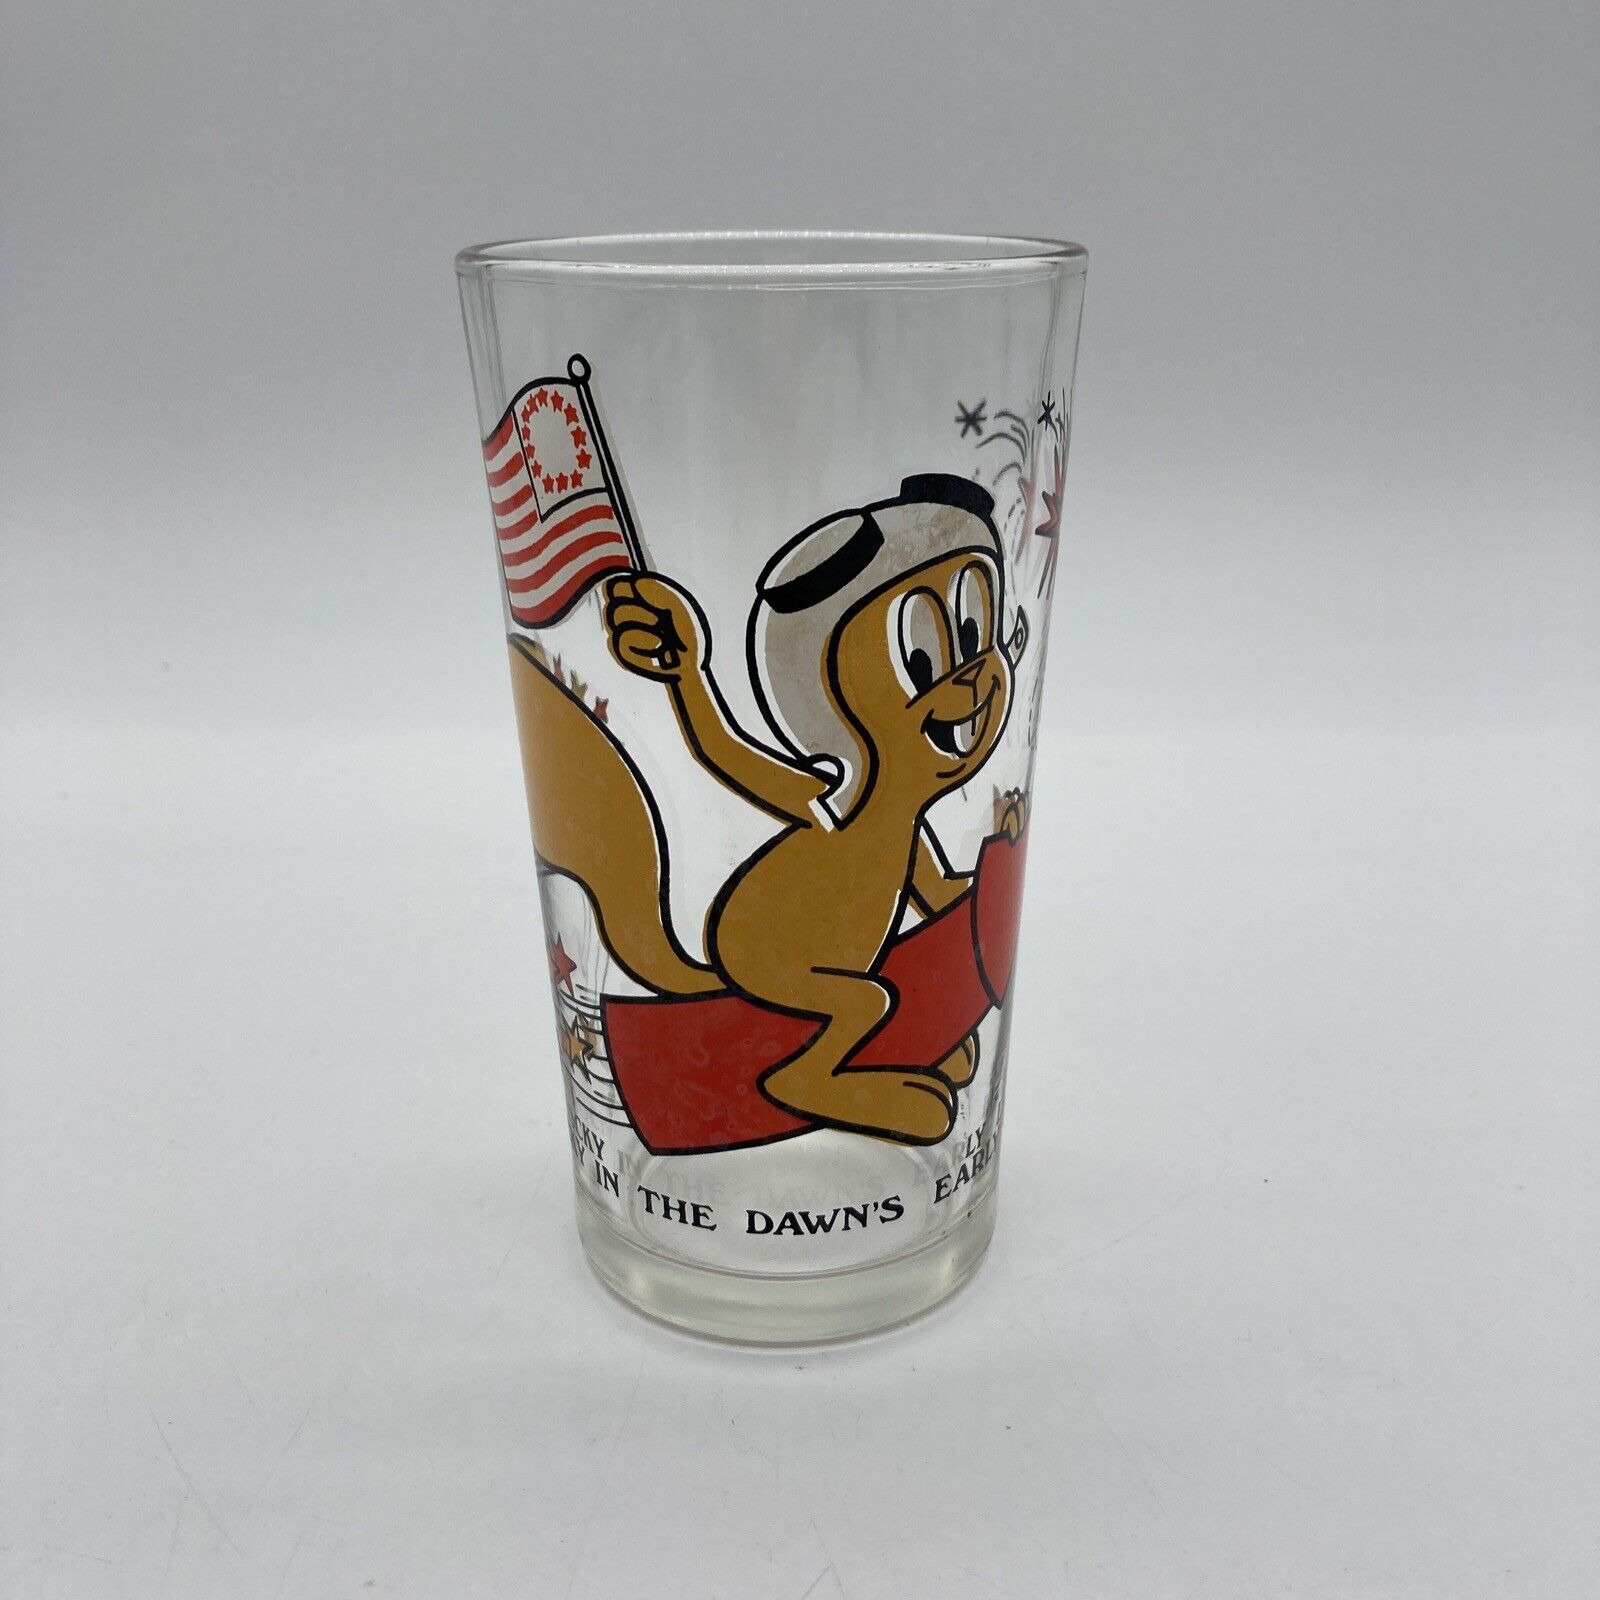 1976 ARBY\'S BICENTENIAL COLLECTOR SERIES ROCKY IN THE DAWNS EARLY LIGHT GLASS